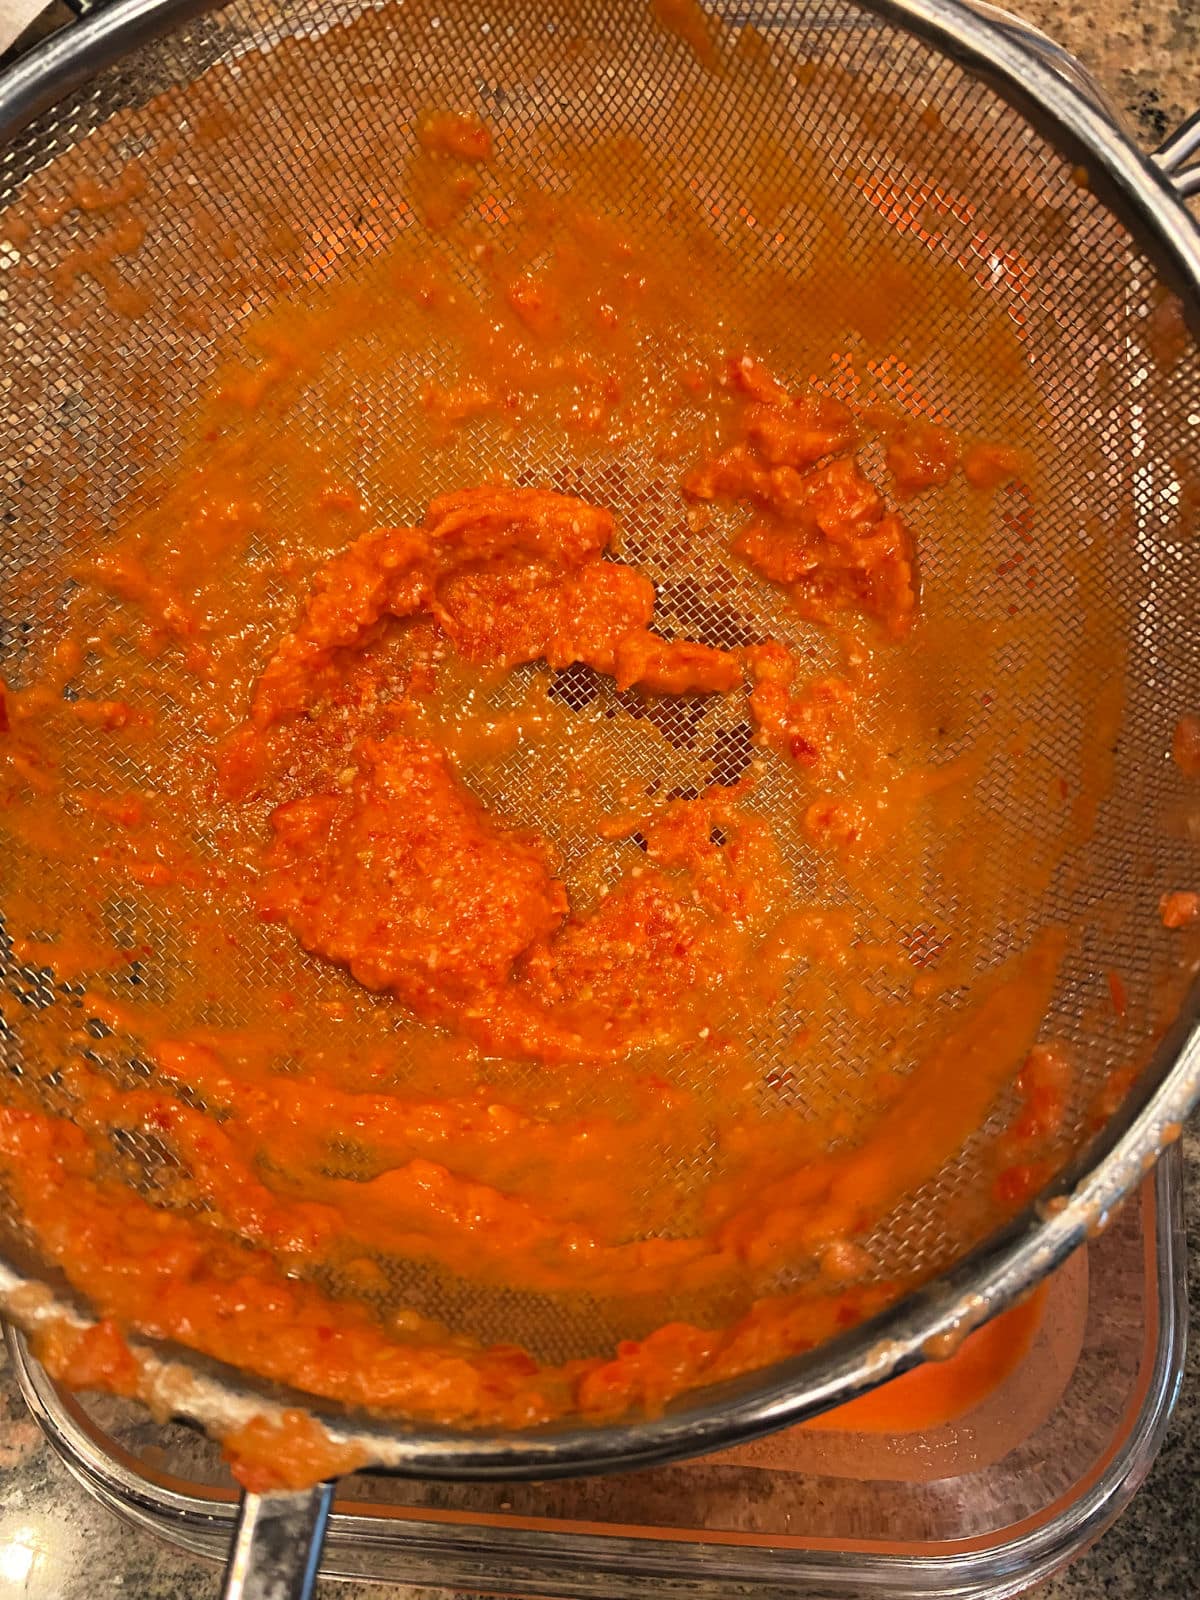 Leftover pulp from straning gazpacho